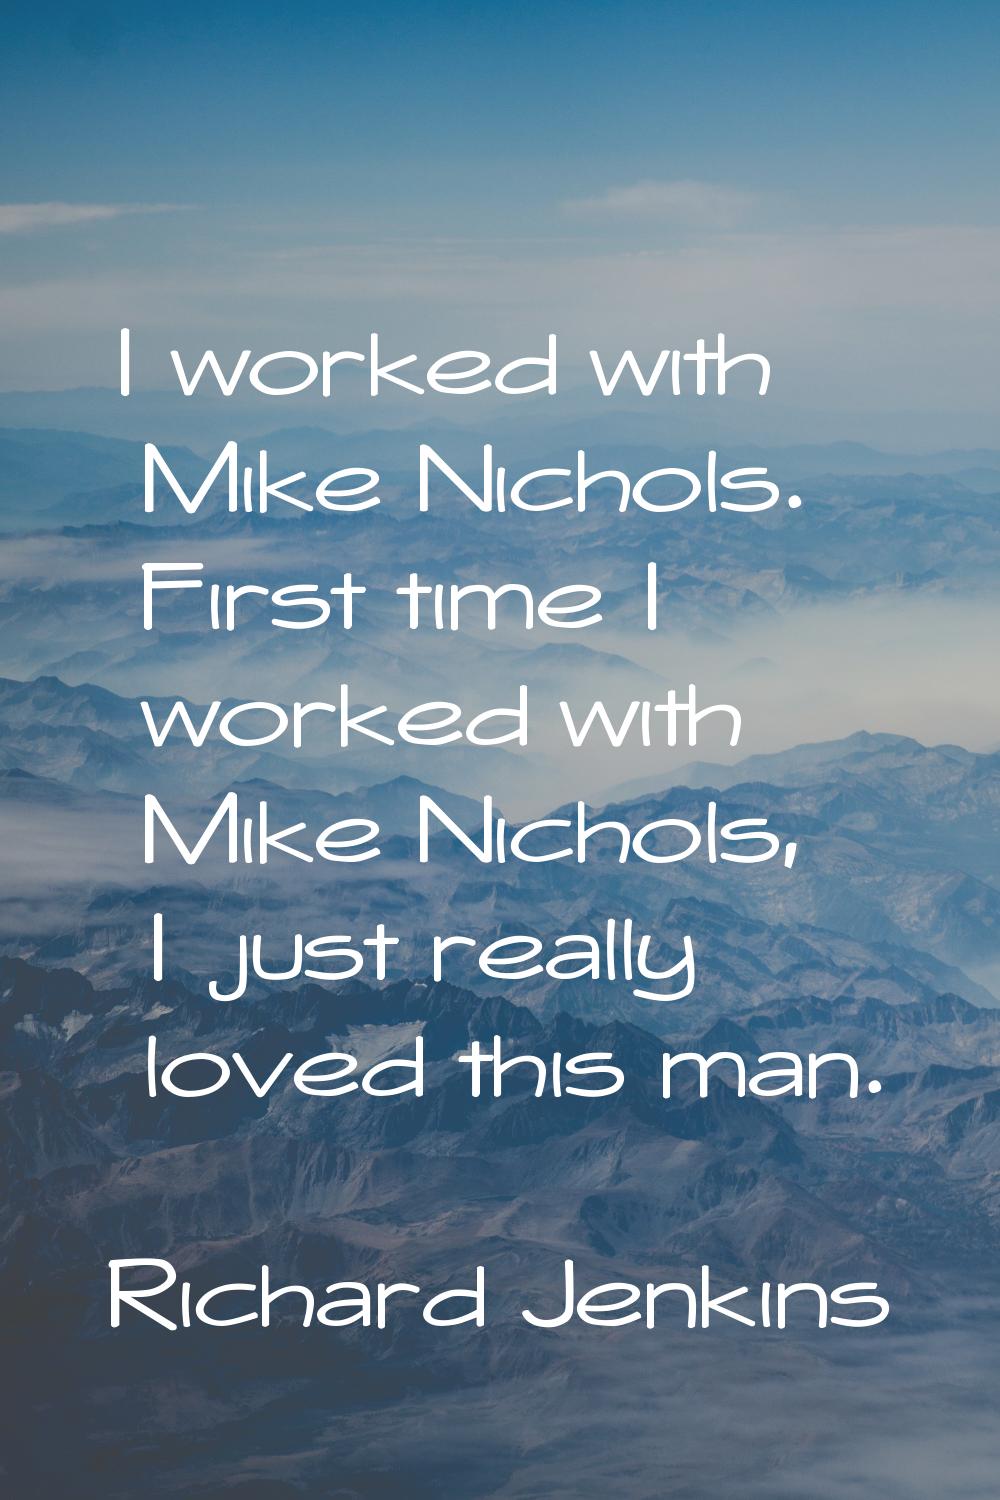 I worked with Mike Nichols. First time I worked with Mike Nichols, I just really loved this man.